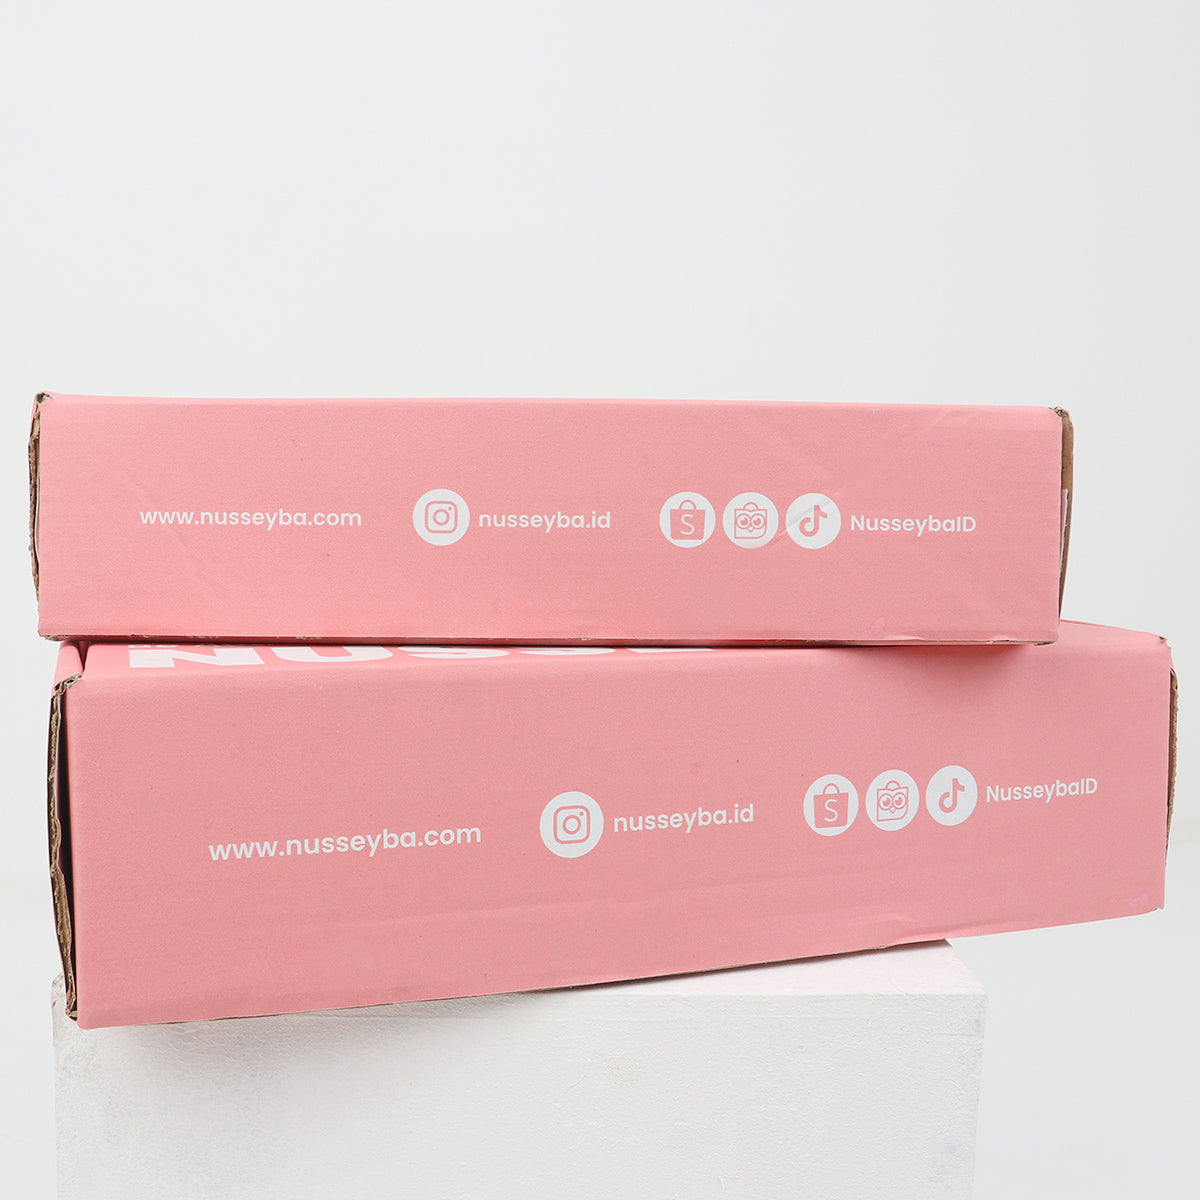 Nusseyba Box Packaging - Pink